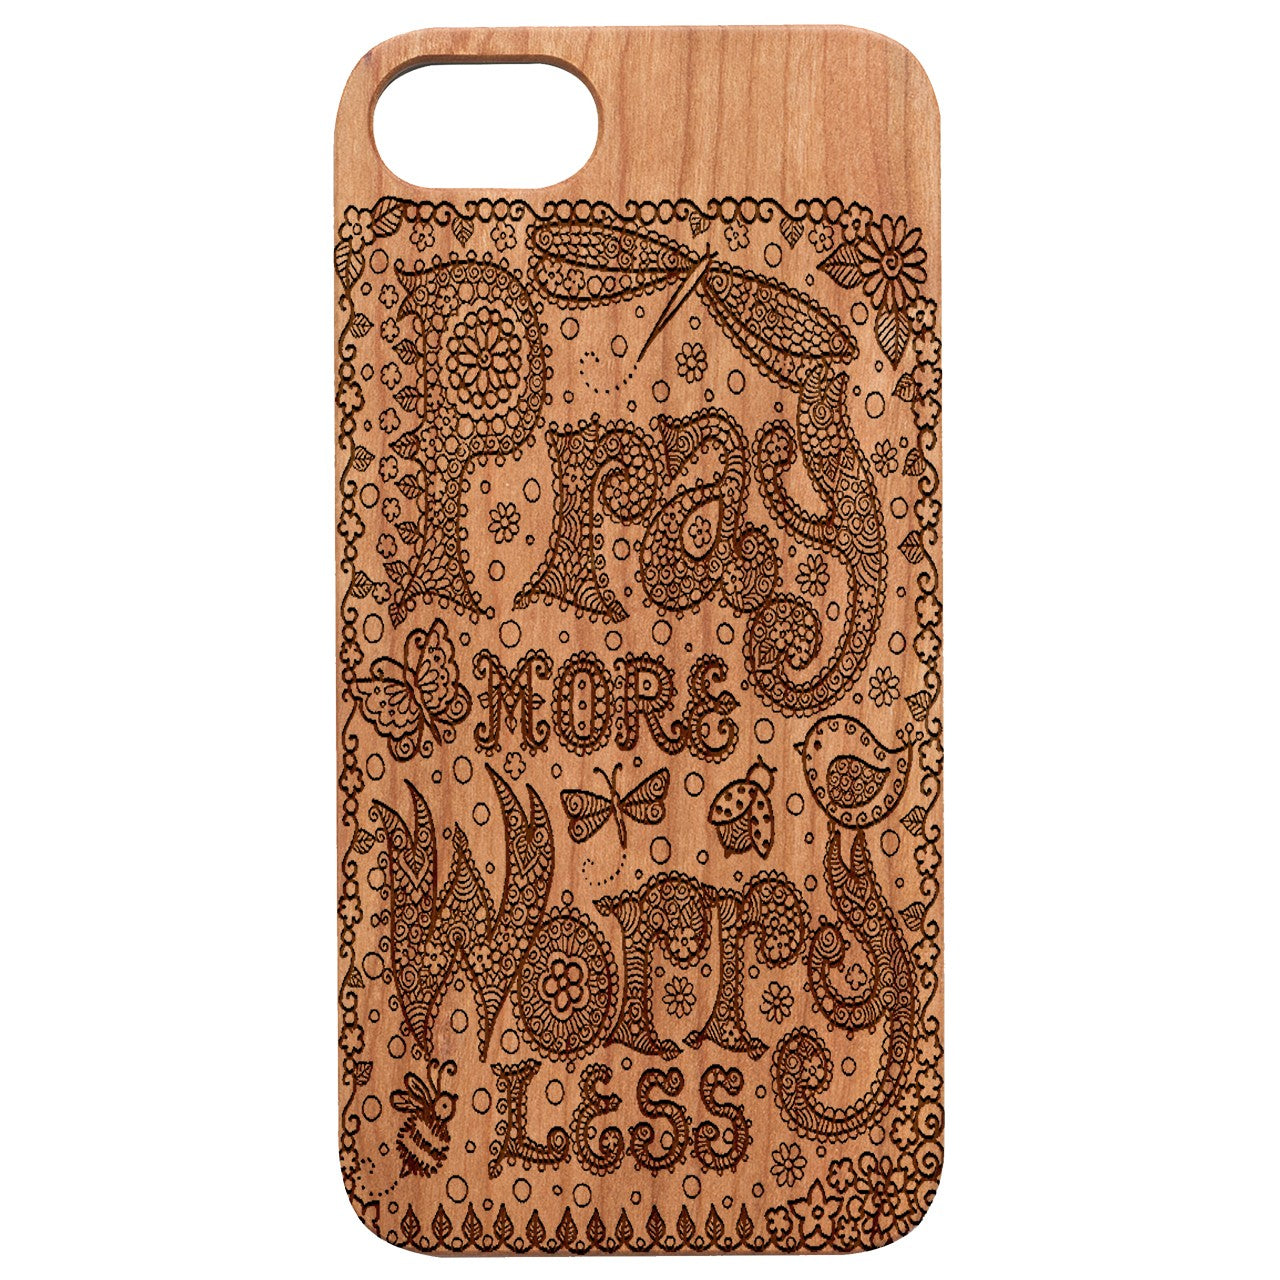  Pray More - Engraved - Wooden Phone Case - IPhone 13 Models